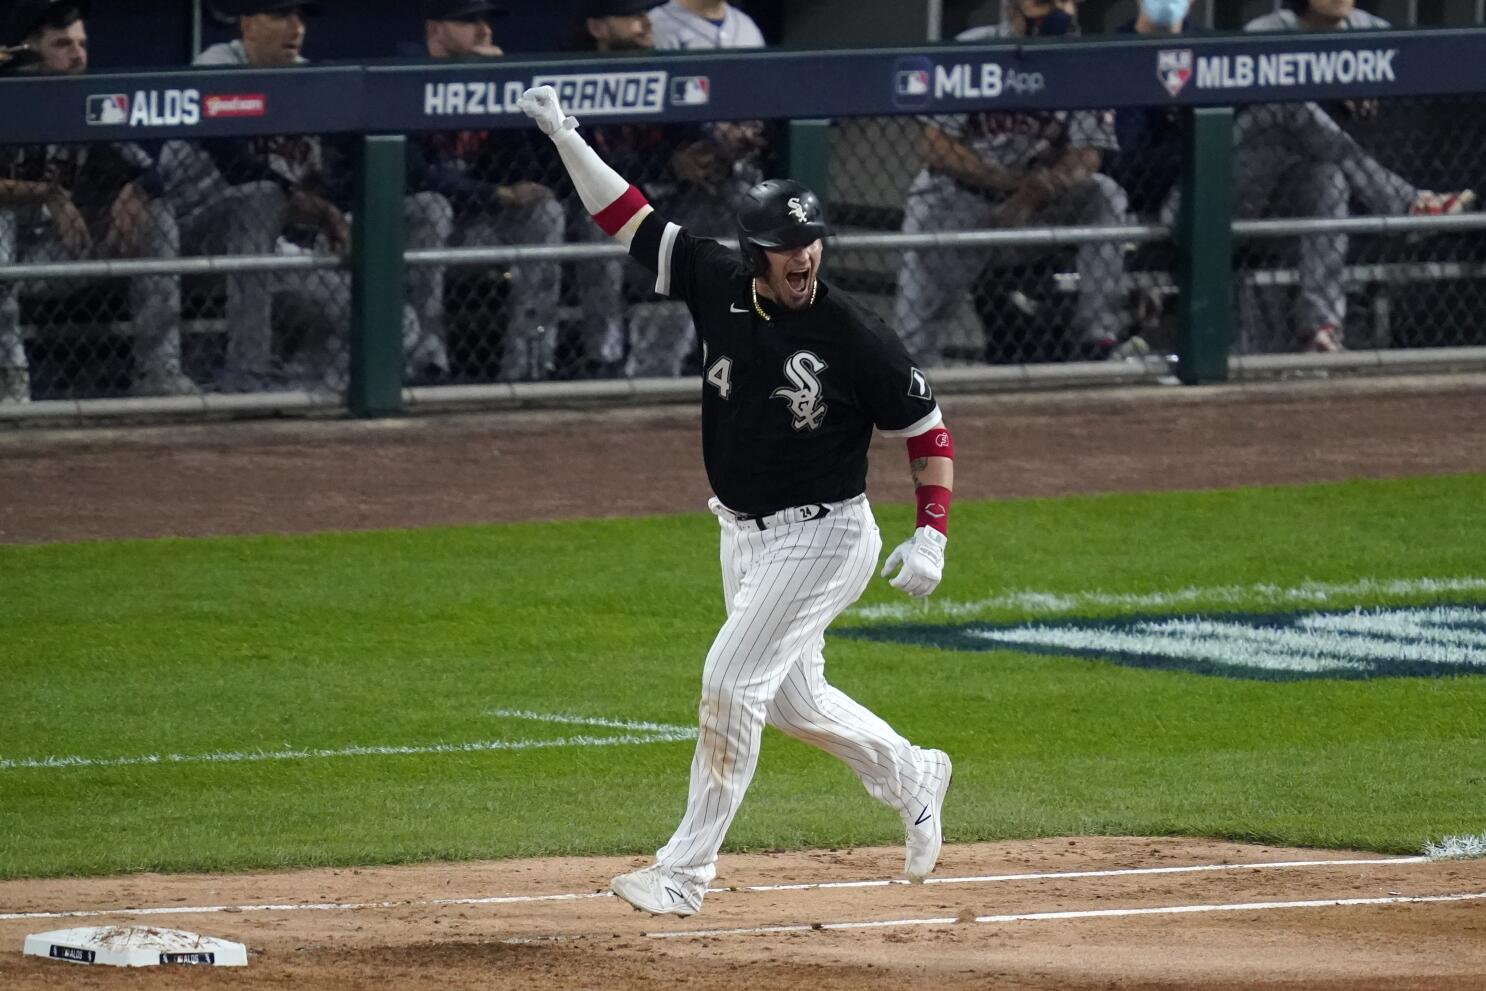 Chicago White Sox: Loss to Houston Astros puts them 14 games under